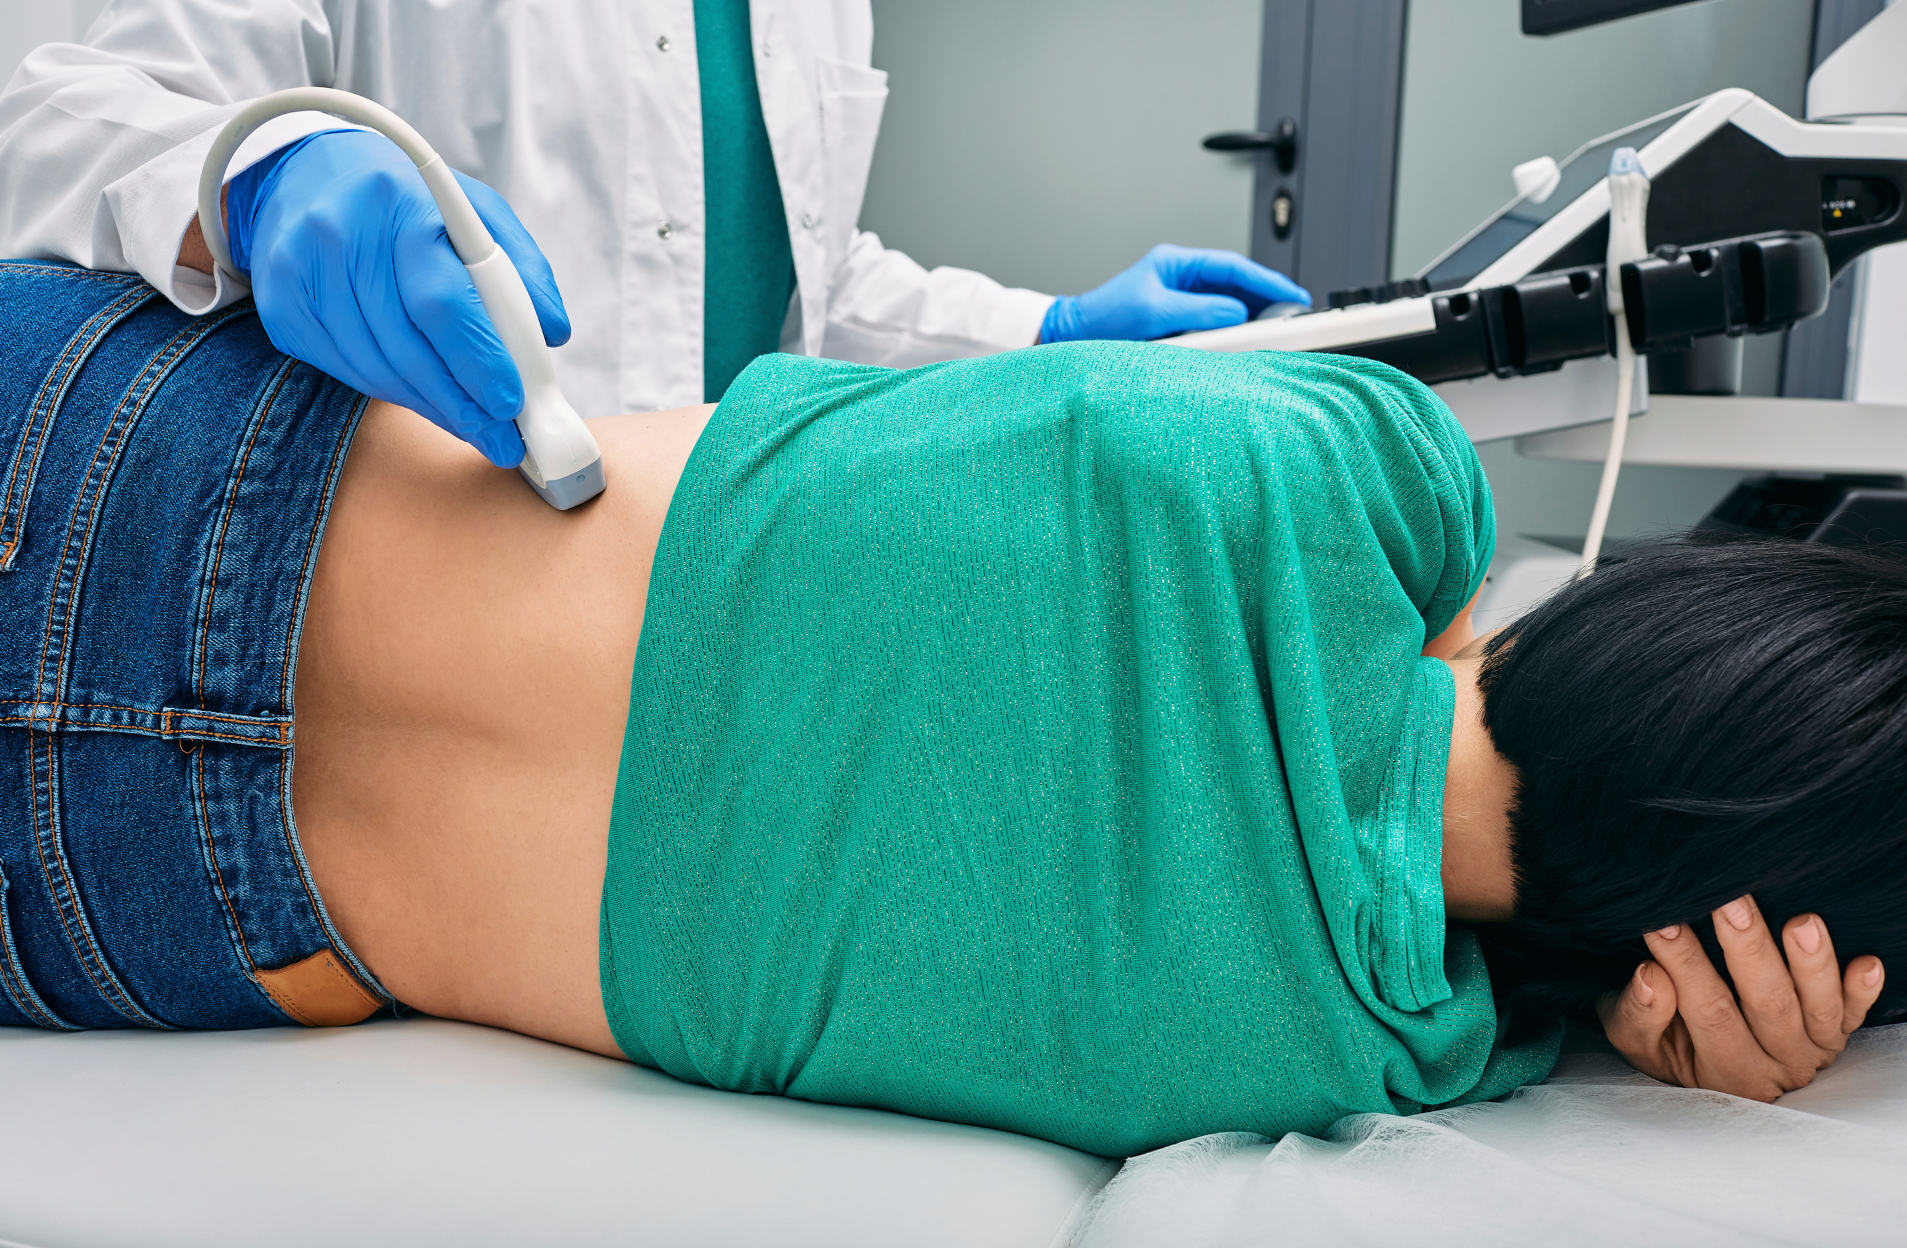 A woman is laying on a bed getting an ultrasound on her back.